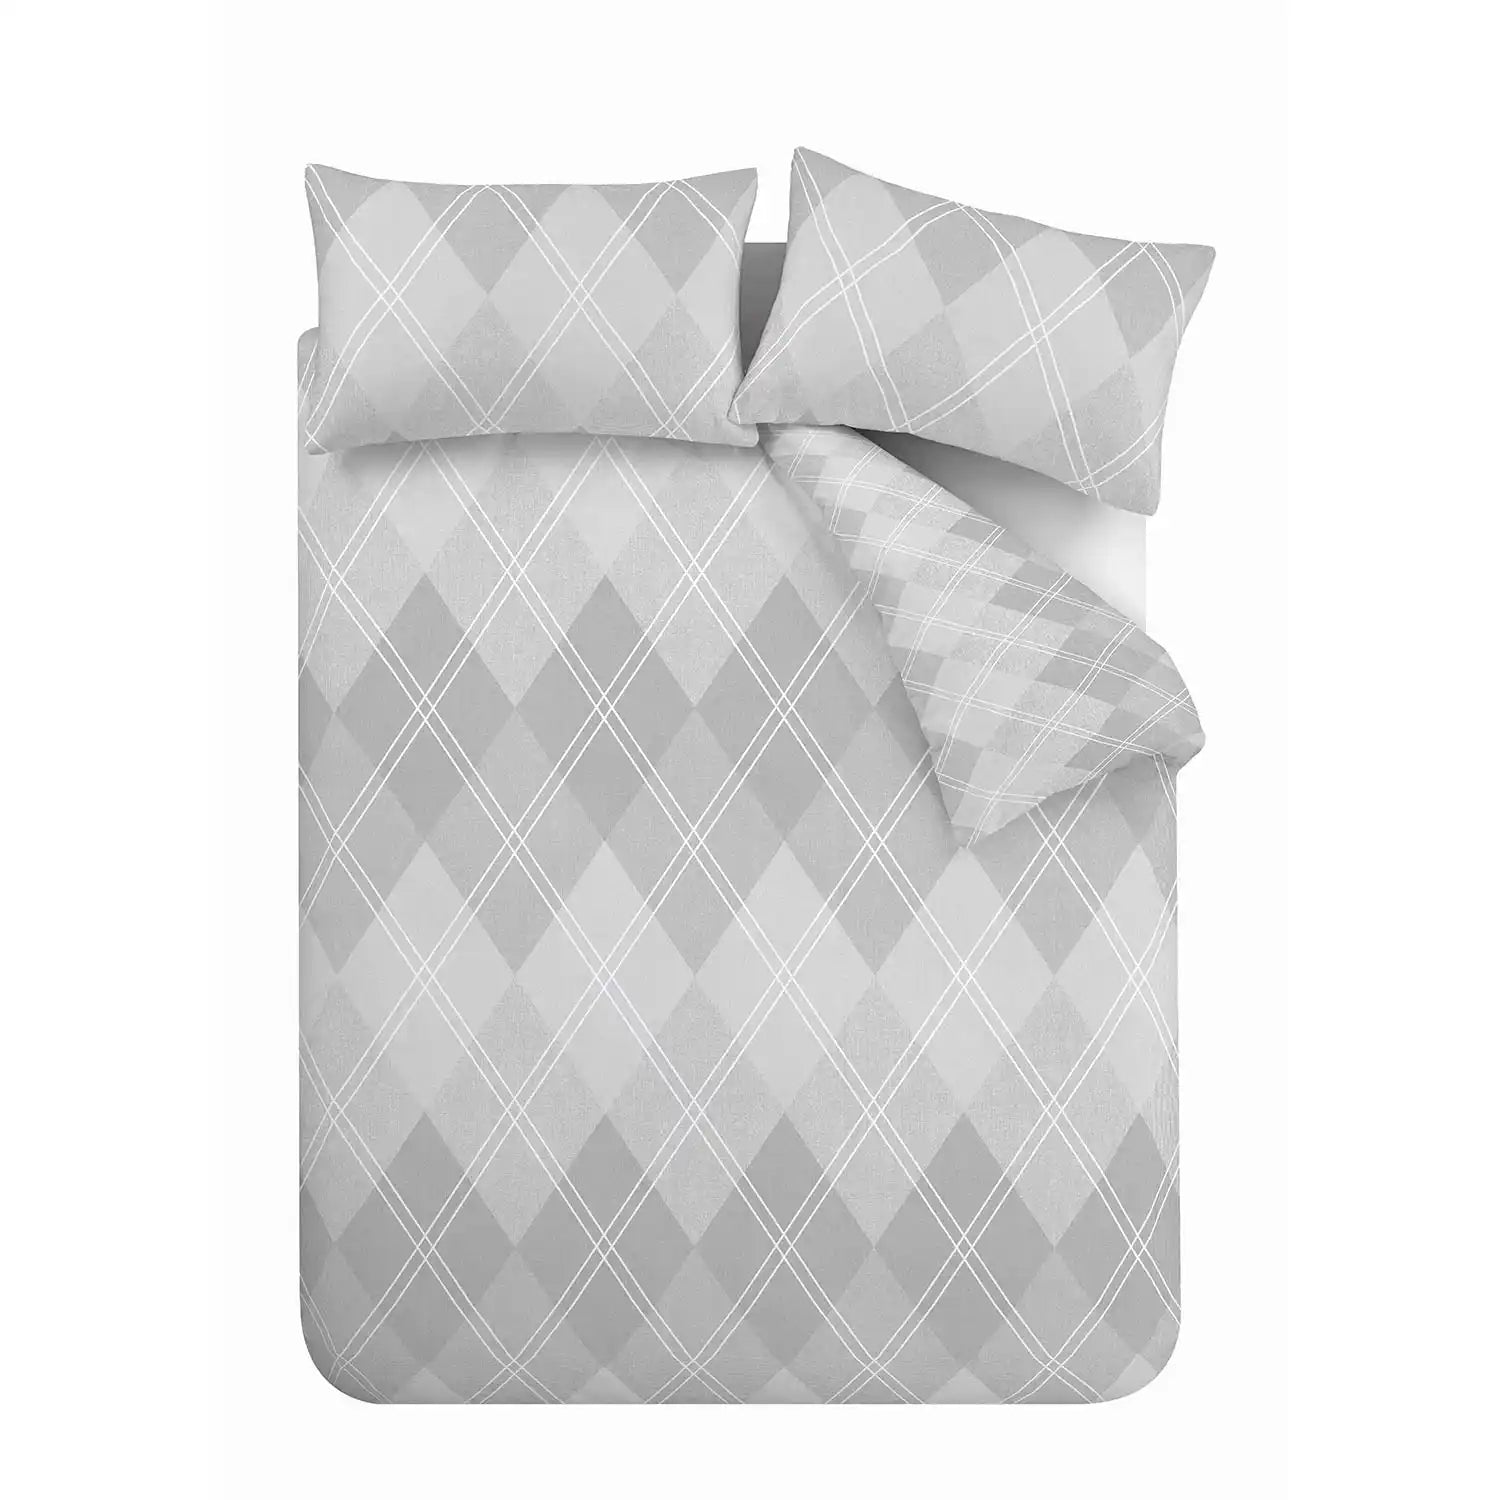  Catherine Lansfield Brushed Argyle Duvet Cover Set - Grey 6 Shaws Department Stores